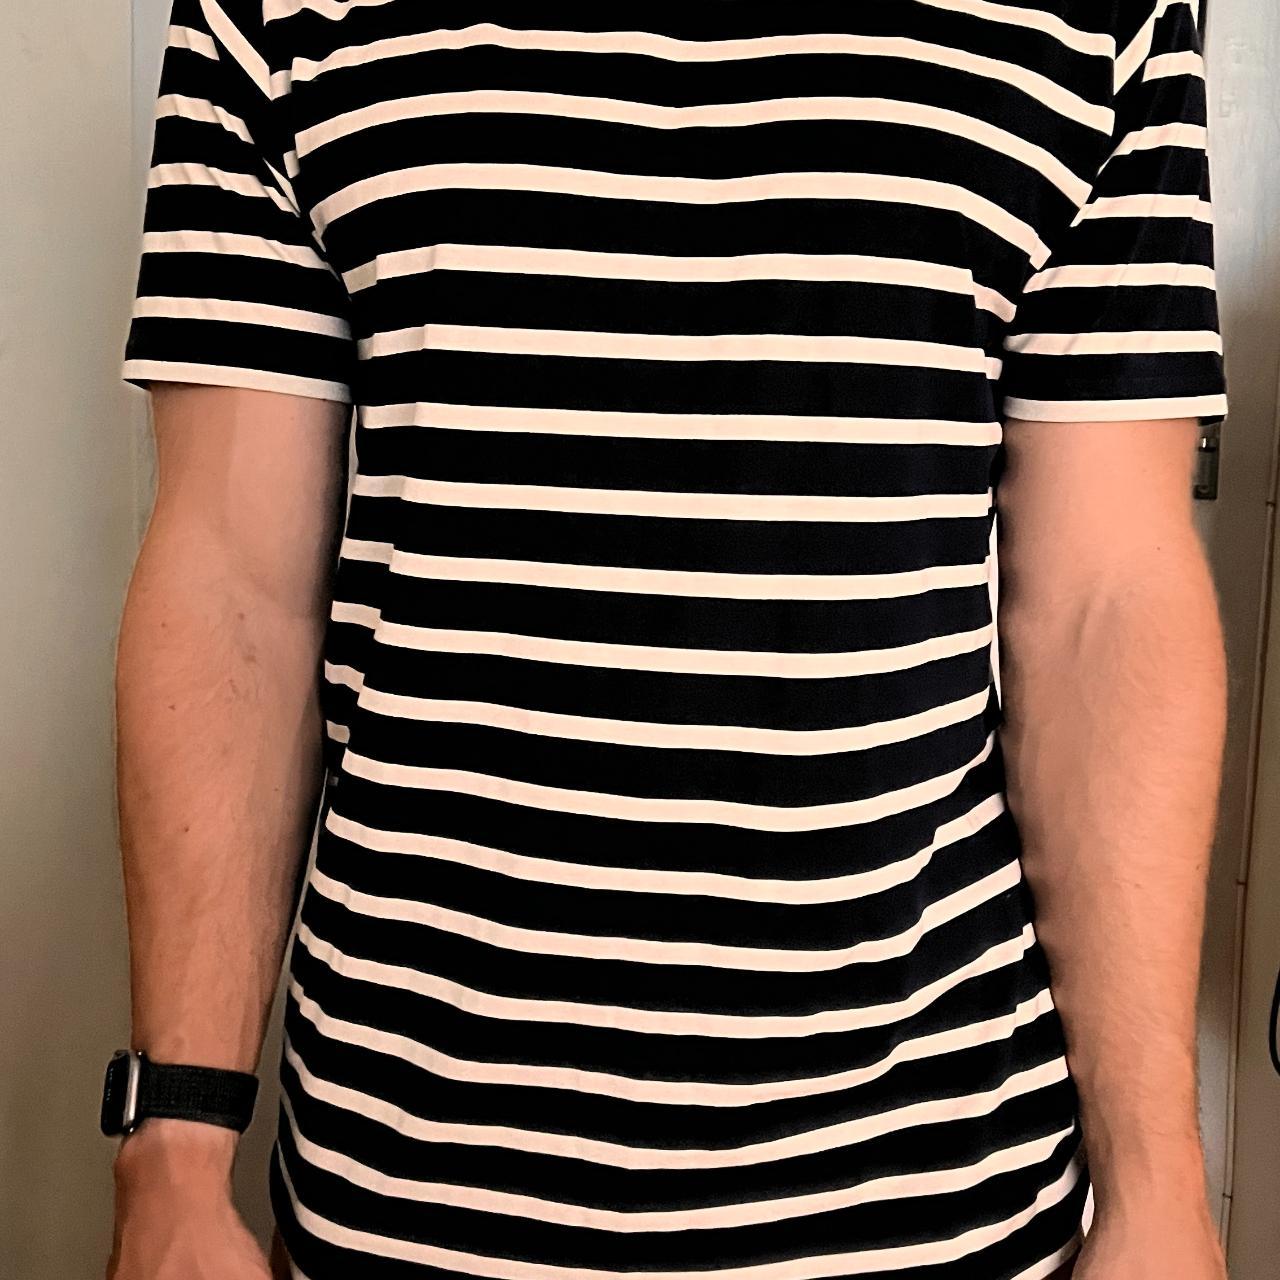 Product Image 1 - Sunspel England striped tee

Size XL

%100